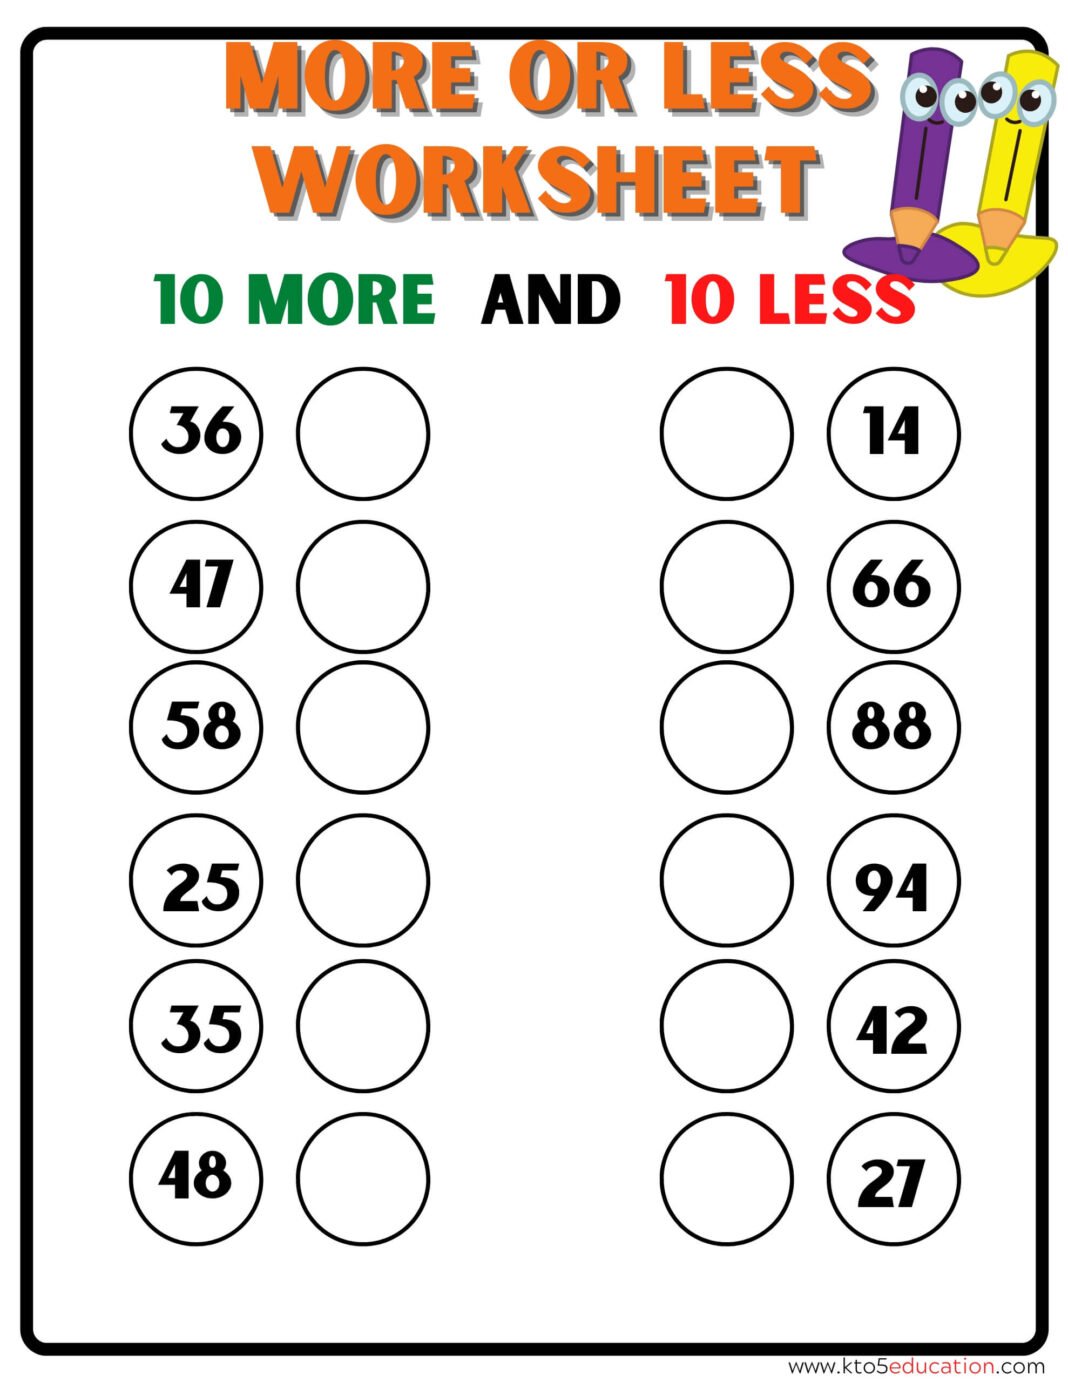 10-more-and-10-less-worksheets-free-download